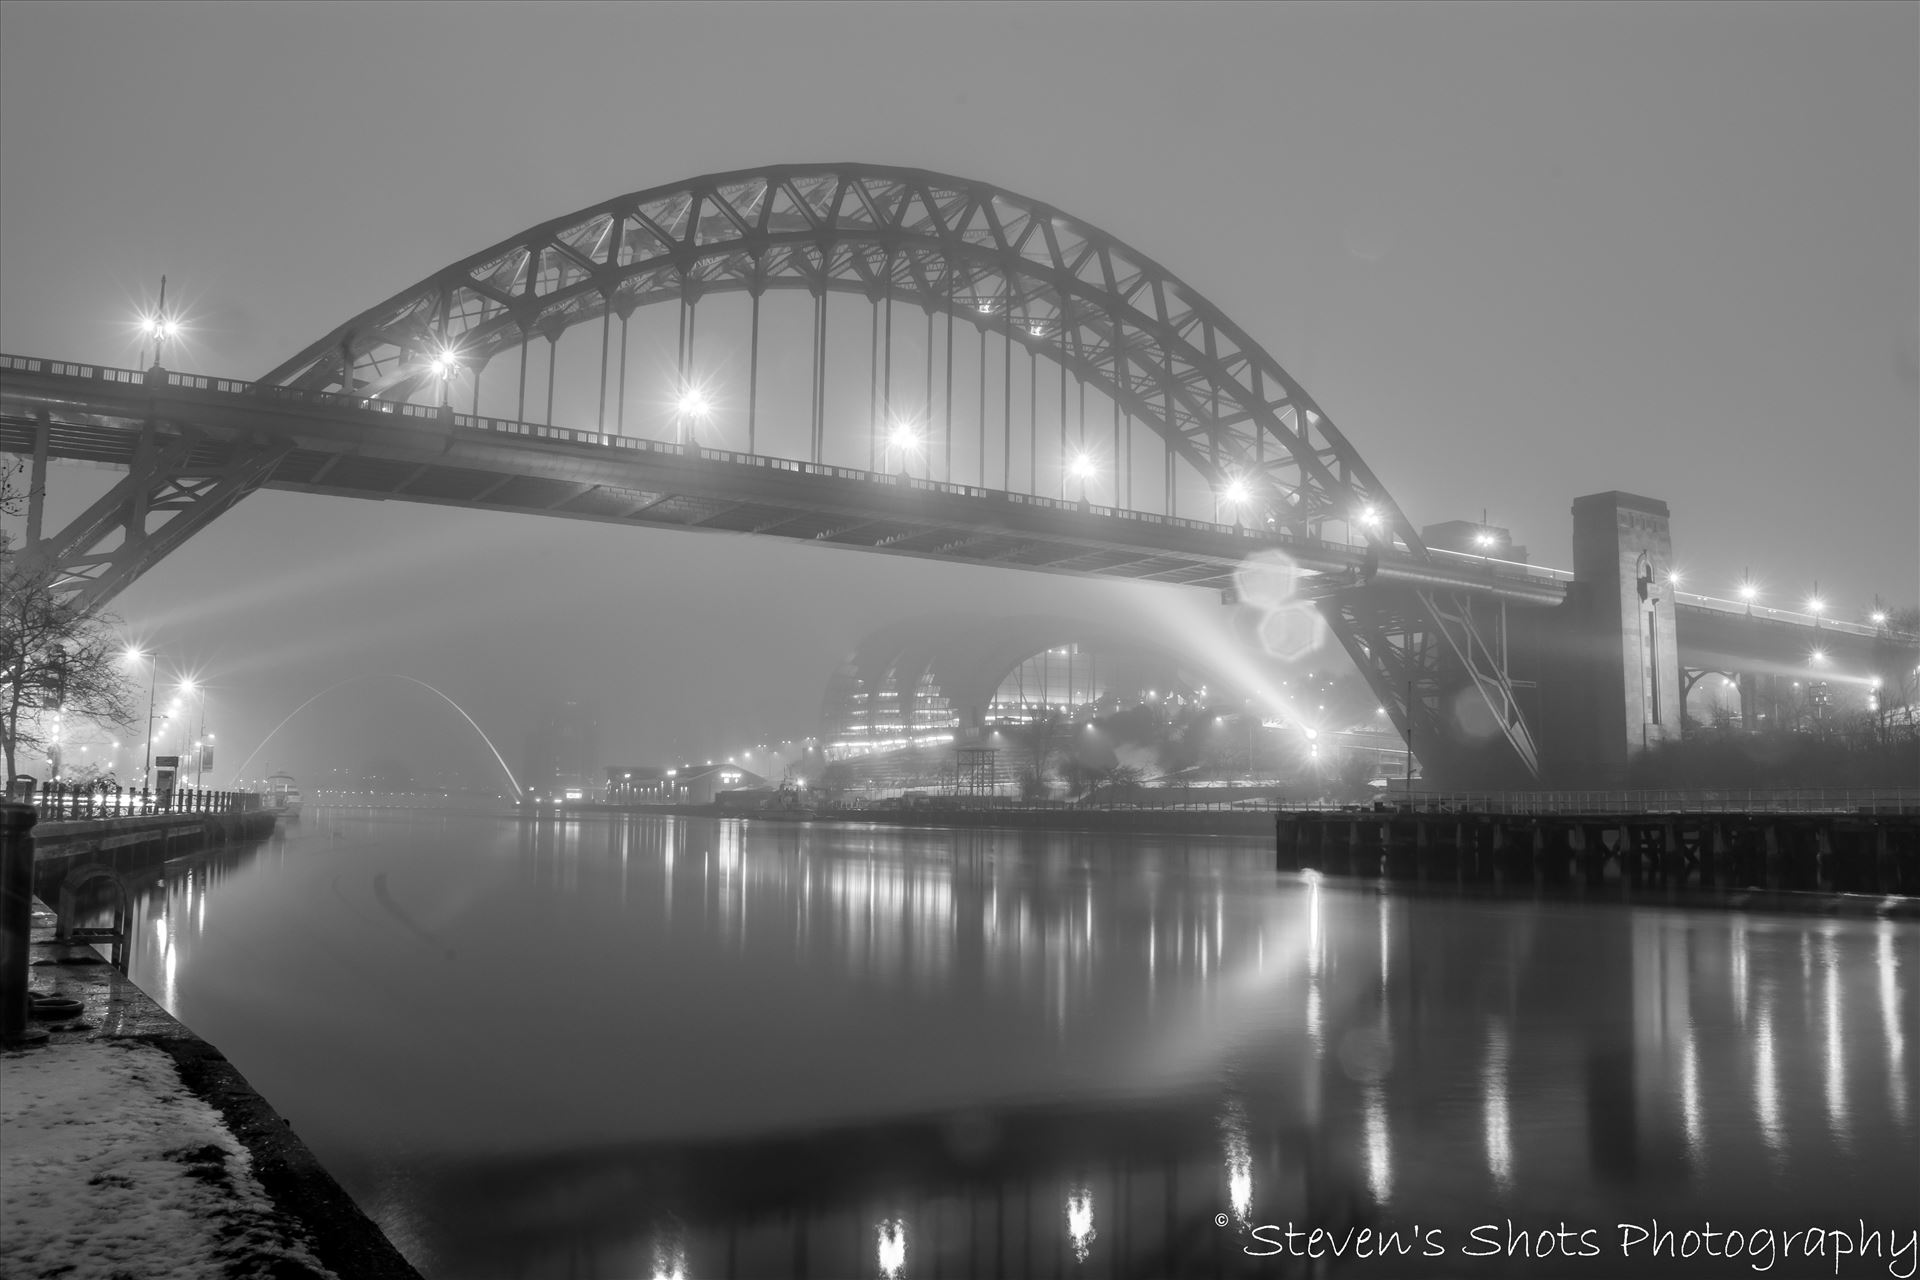 Fog on the Tyne - A foggy night on the River Tyne looking at the Tyne Bridge and the Sage is barely visible in the background. by Steven's Shots Photography